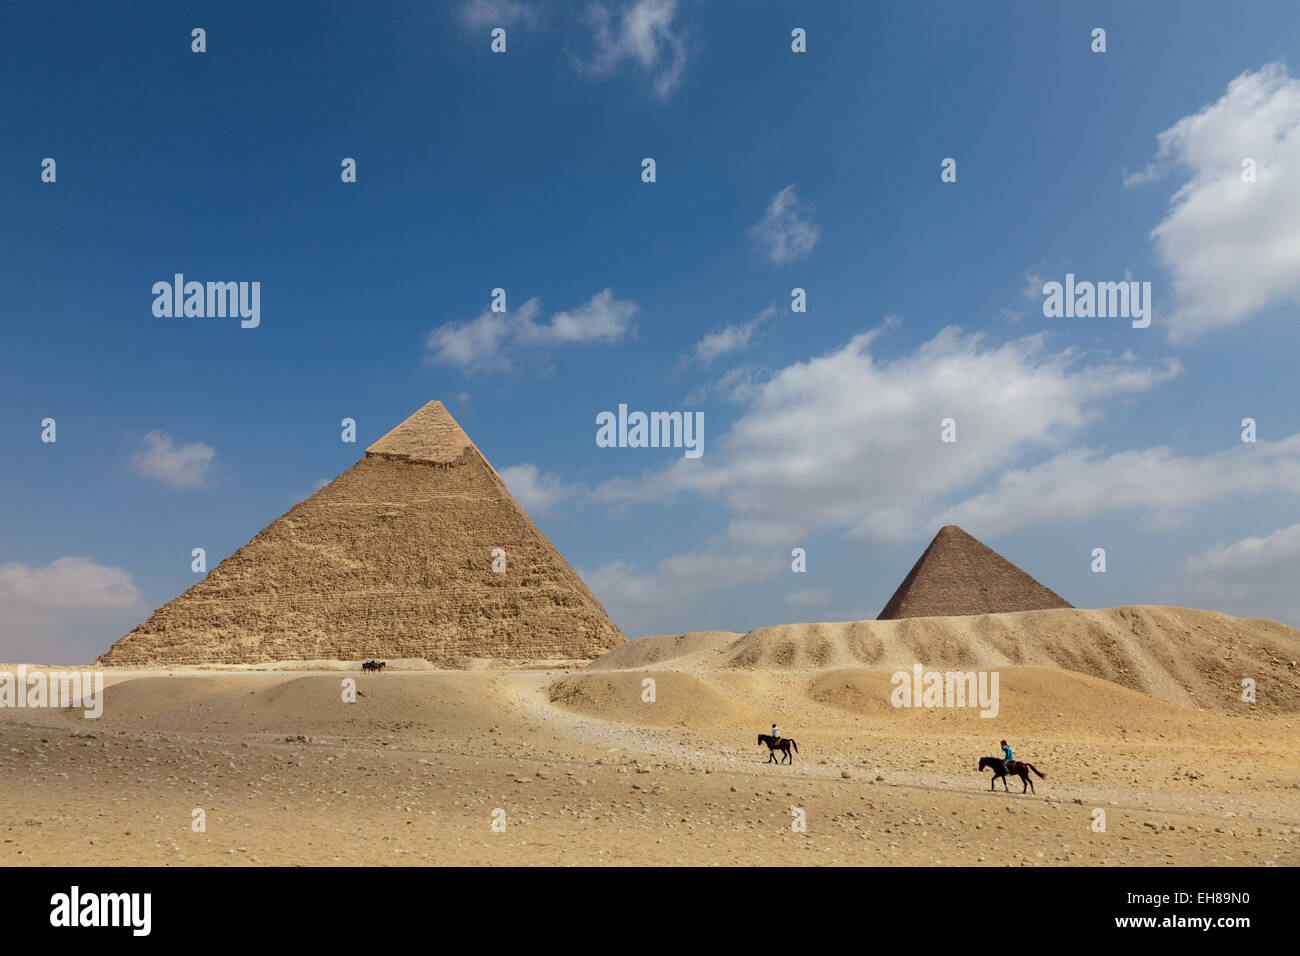 The Pyramid of Khafre and the Great Pyramid in Giza, UNESCO World Heritage Site, near Cairo, Egypt, North Africa, Africa Stock Photo